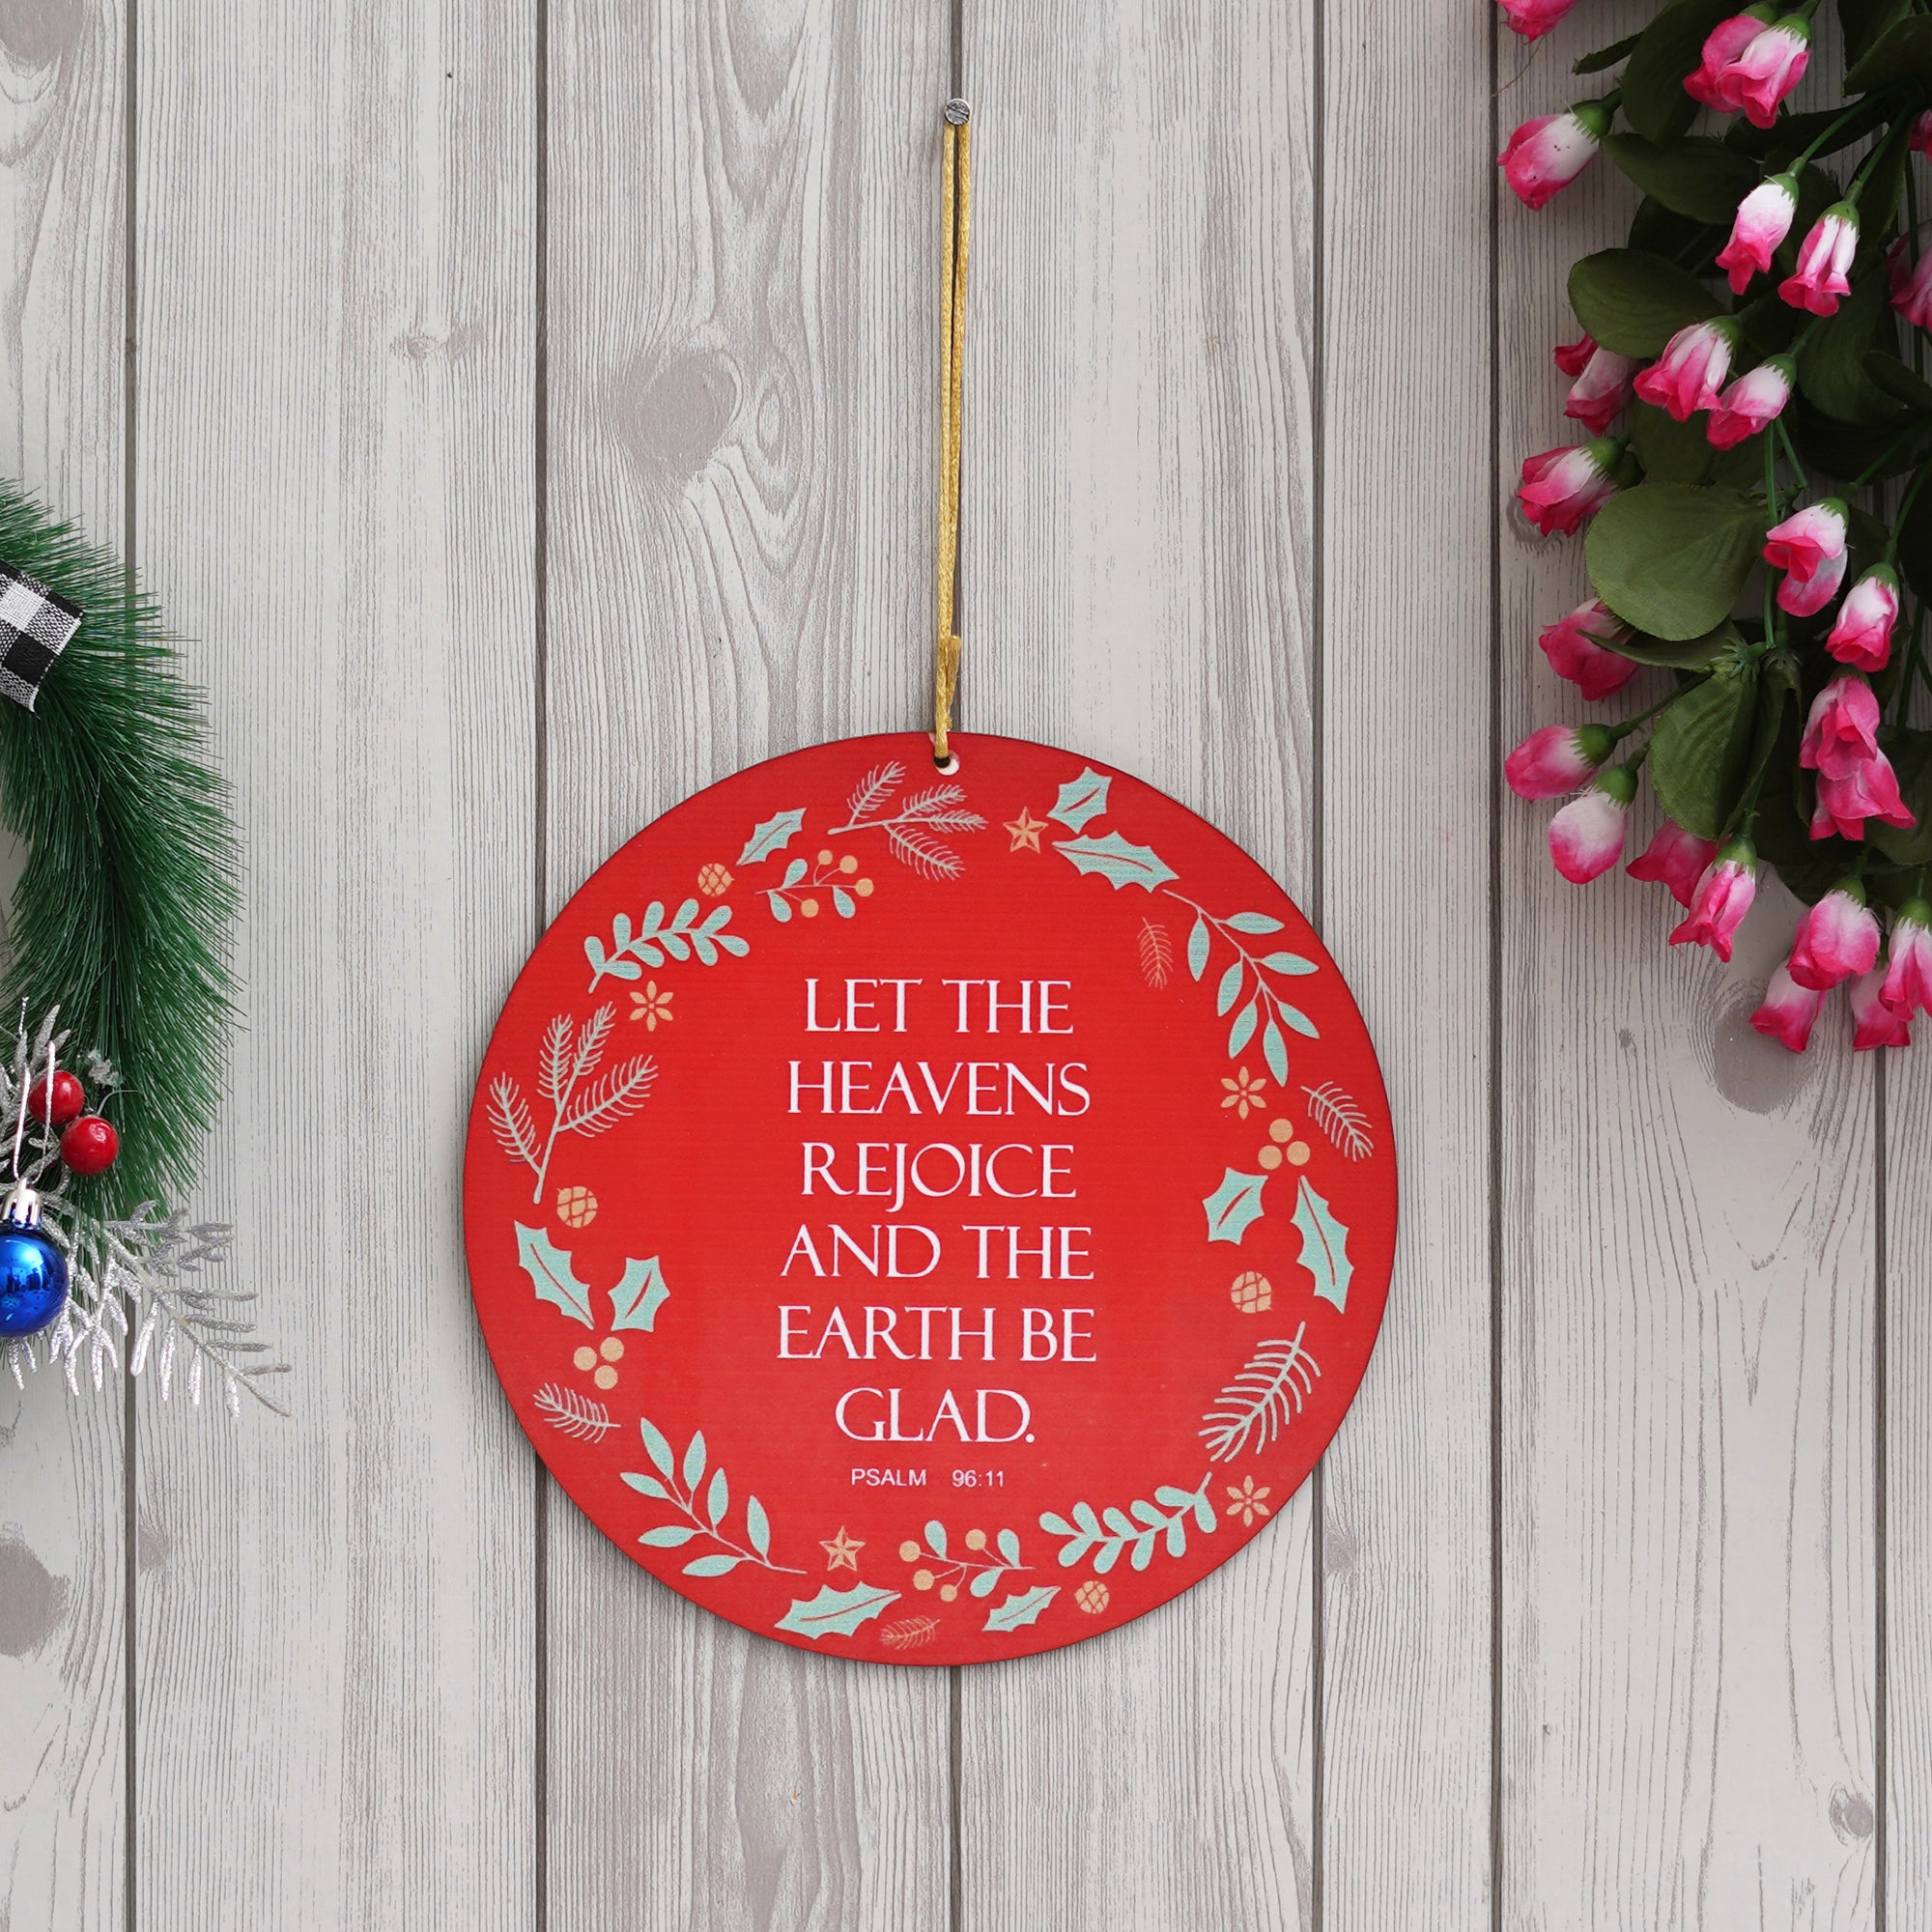 eCraftIndia "LET THE HEAVENS REJOICE AND THE EARTH BE GLAD. PSALM 96:11" Printed Merry Christmas Wooden Door Wall Hanging Ornaments for Home Decoration (Red, Green, White) 1